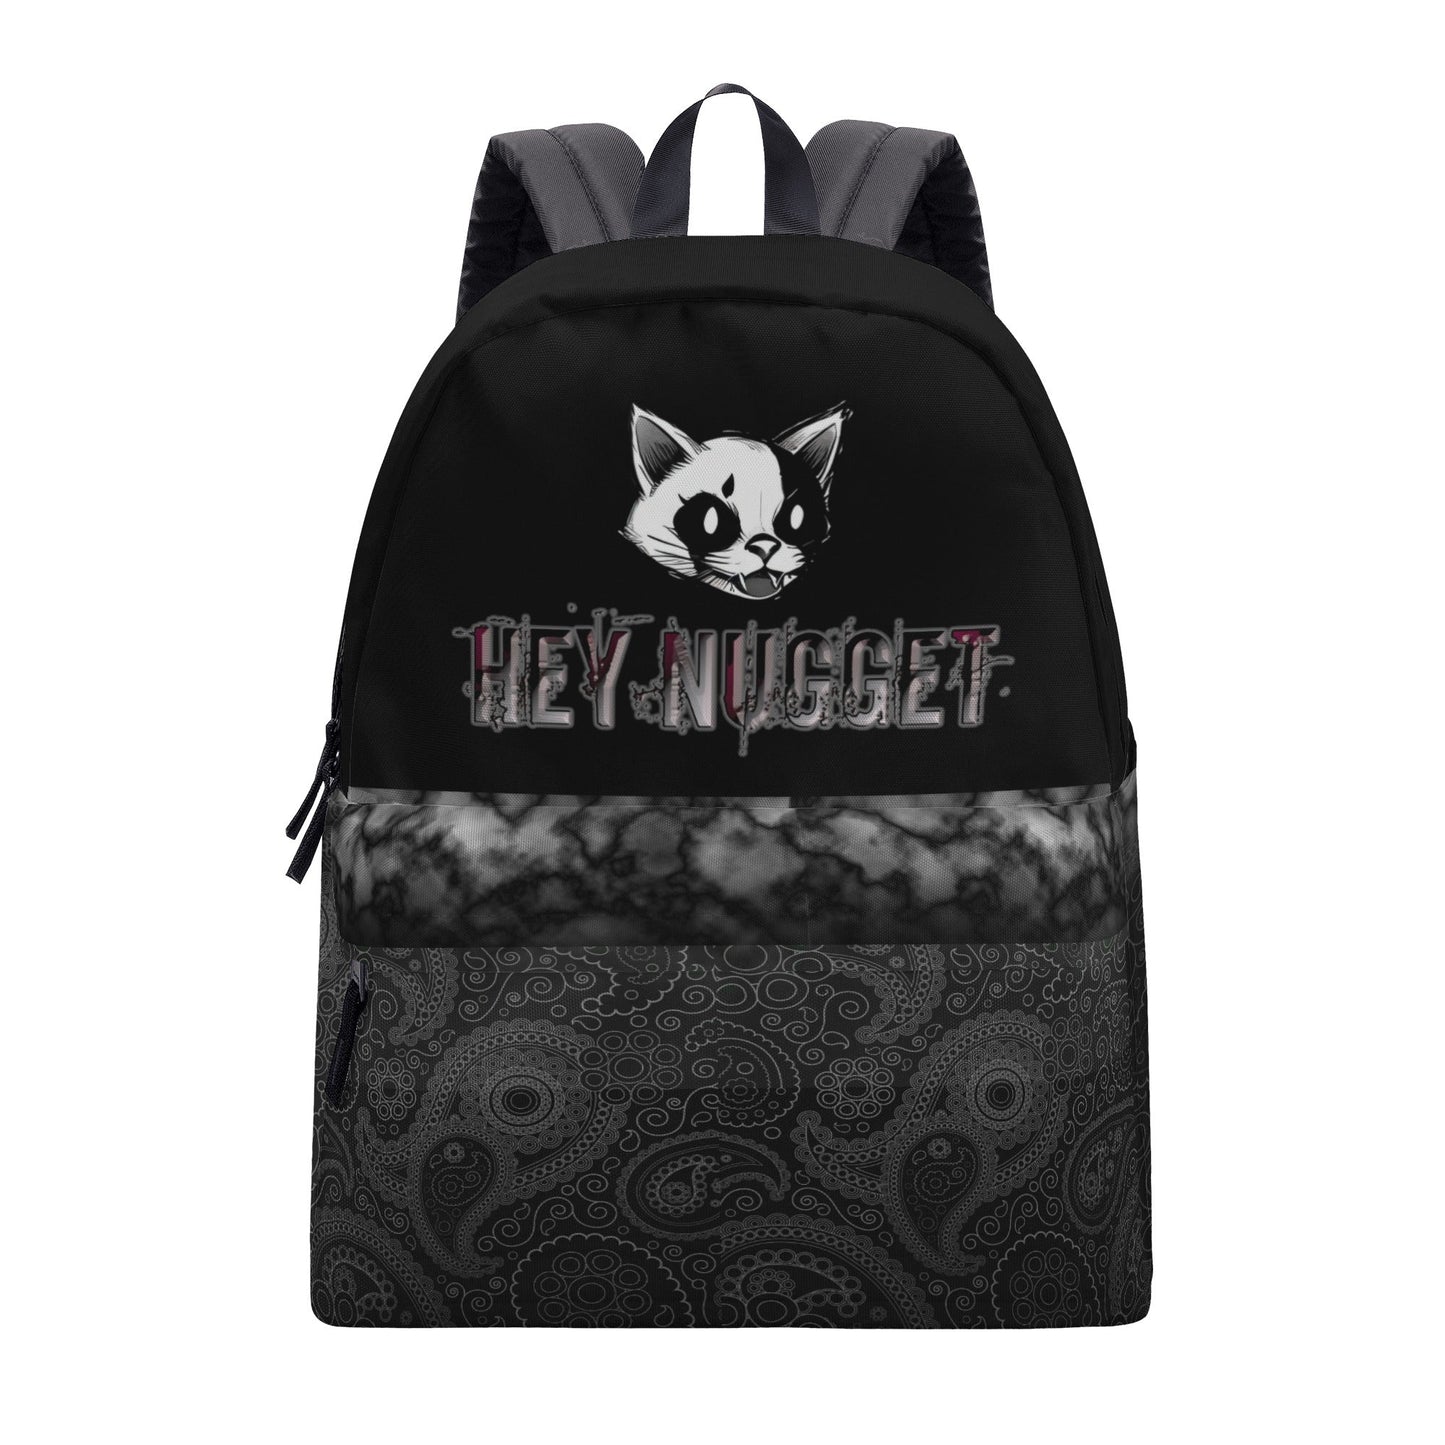 Stand out  with the  Bandana style Cotton Backpack  available at Hey Nugget. Grab yours today!